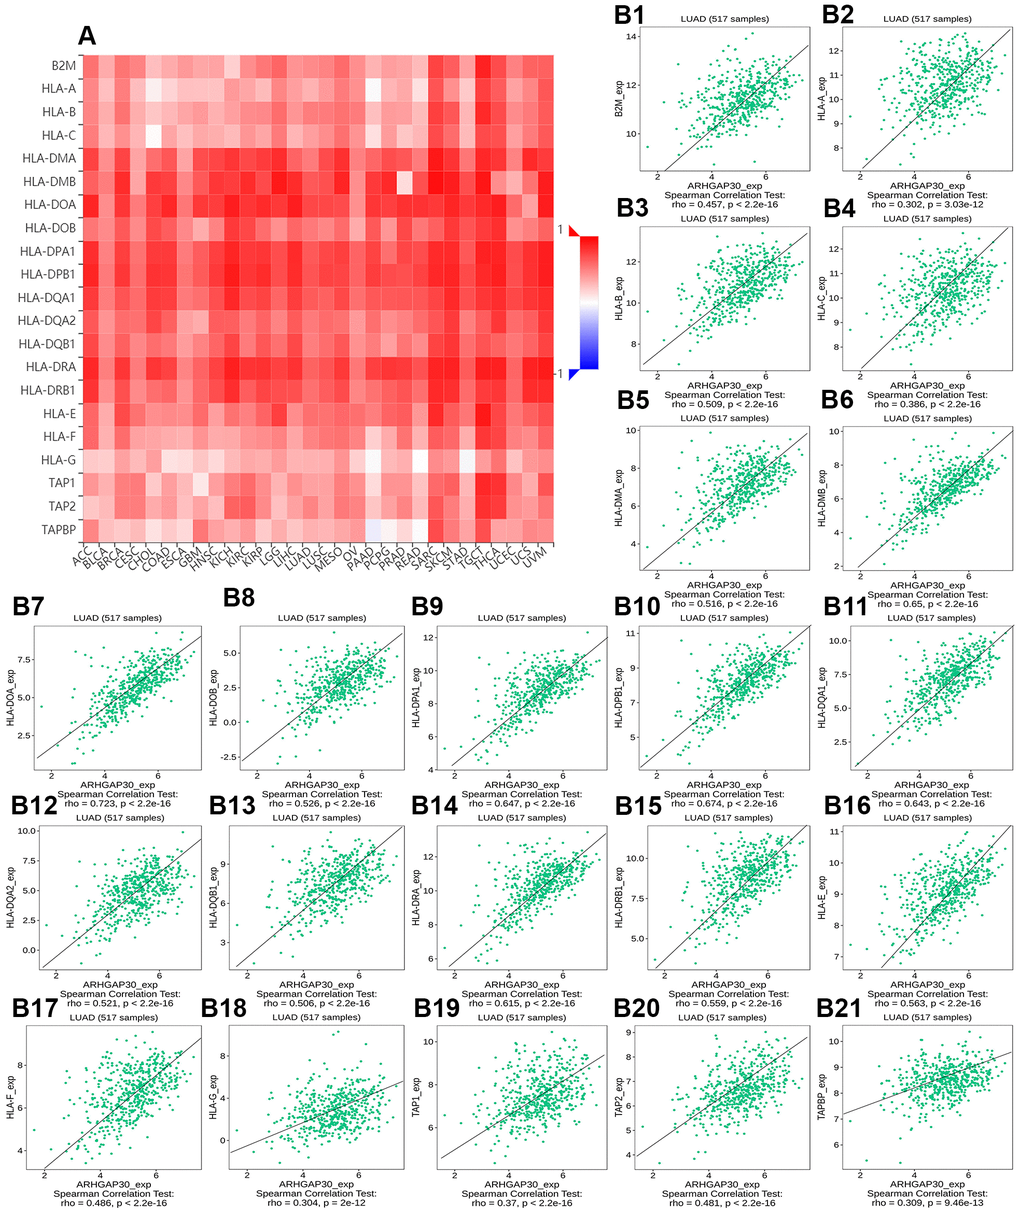 The correlation between the expression of ARHGAP30 and immune inhibitors. (A) Heat map of Spearman correlations between ARHGAP30 expression and immune inhibitors across human cancers. (B1–B21) Scatter plots showing the positive correlation between ARHGAP30 expression and immune inhibitors in the treatment of lung adenocarcinoma.